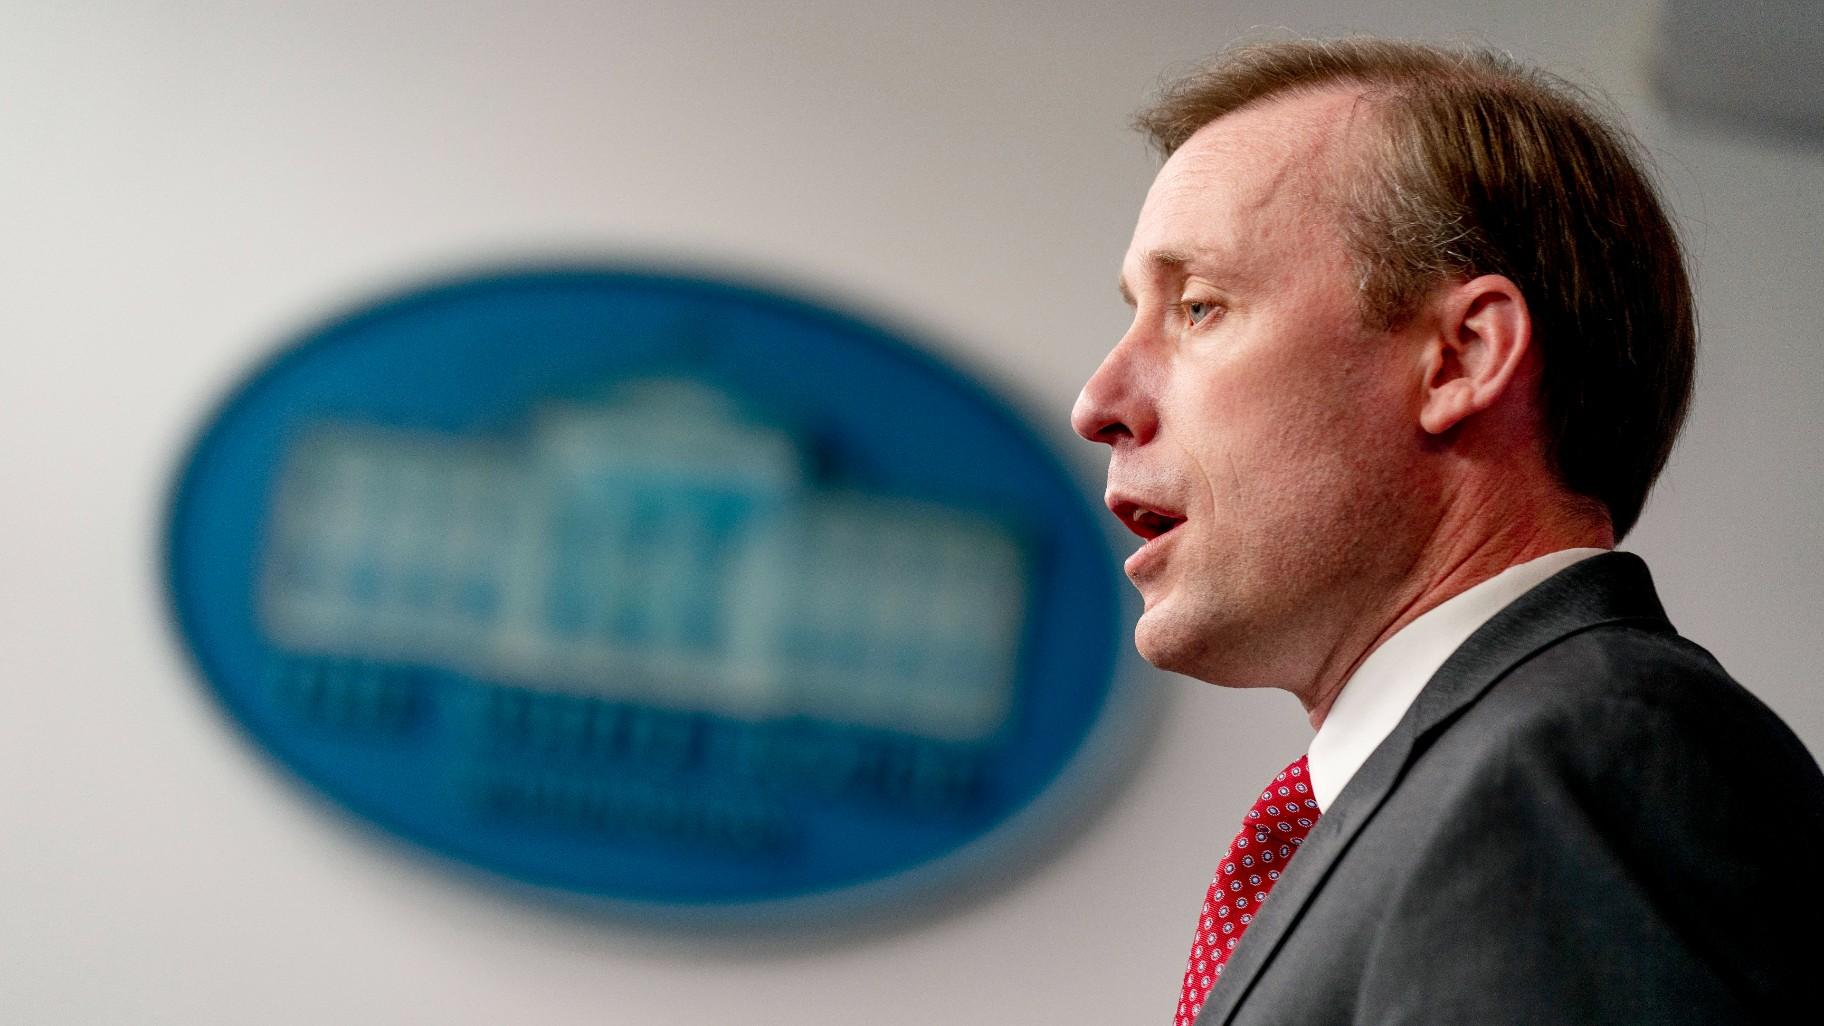 White House national security adviser Jake Sullivan gives an update about the ongoing talks with Russia at a press briefing at the White House in Washington, Thursday, Jan. 13, 2022. (AP Photo / Andrew Harnik)